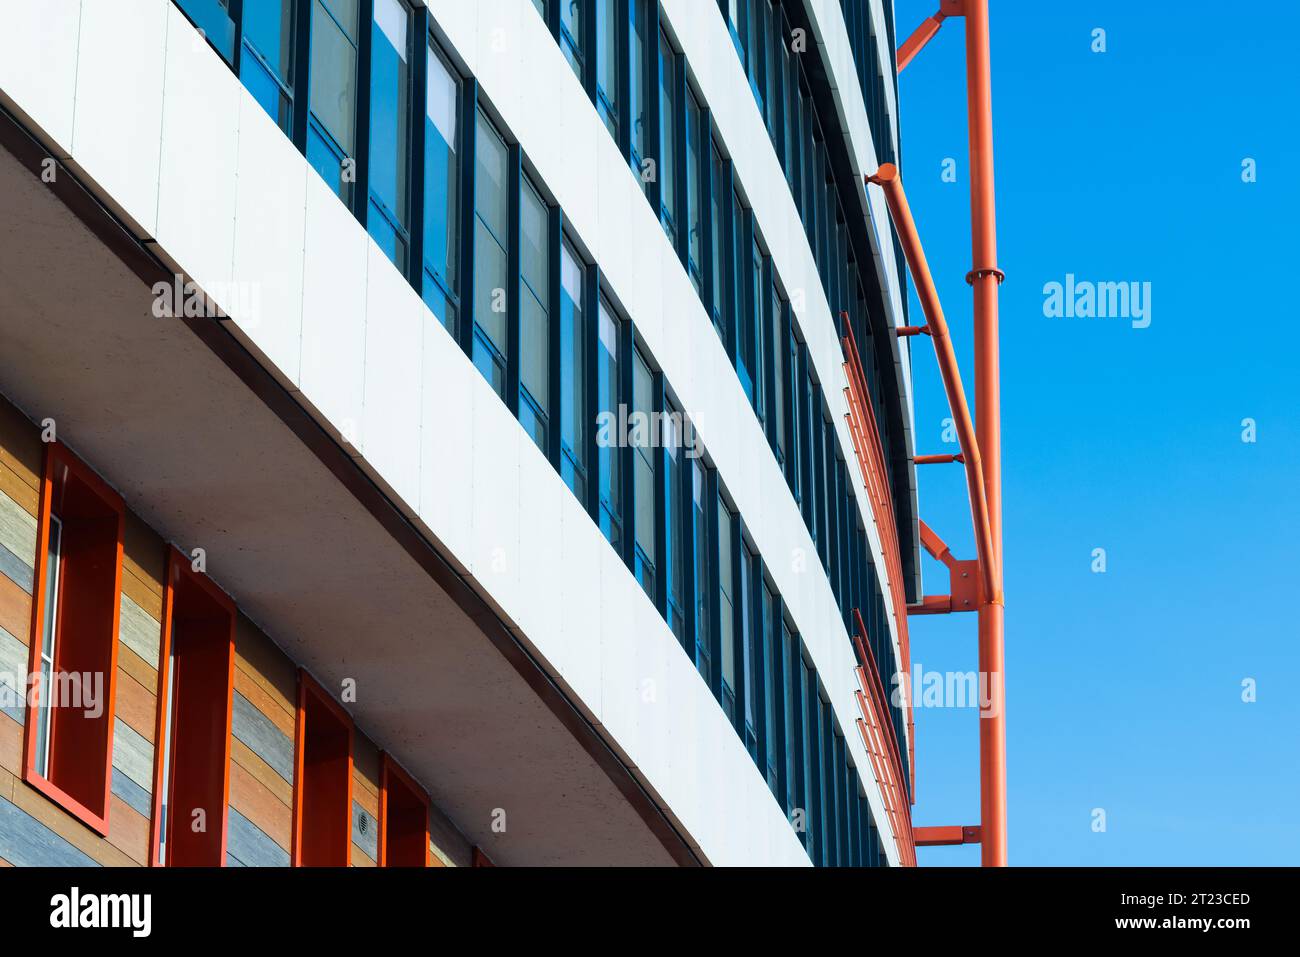 White house facade with red steel details is under blue sky. Abstract modern architecture background Stock Photo